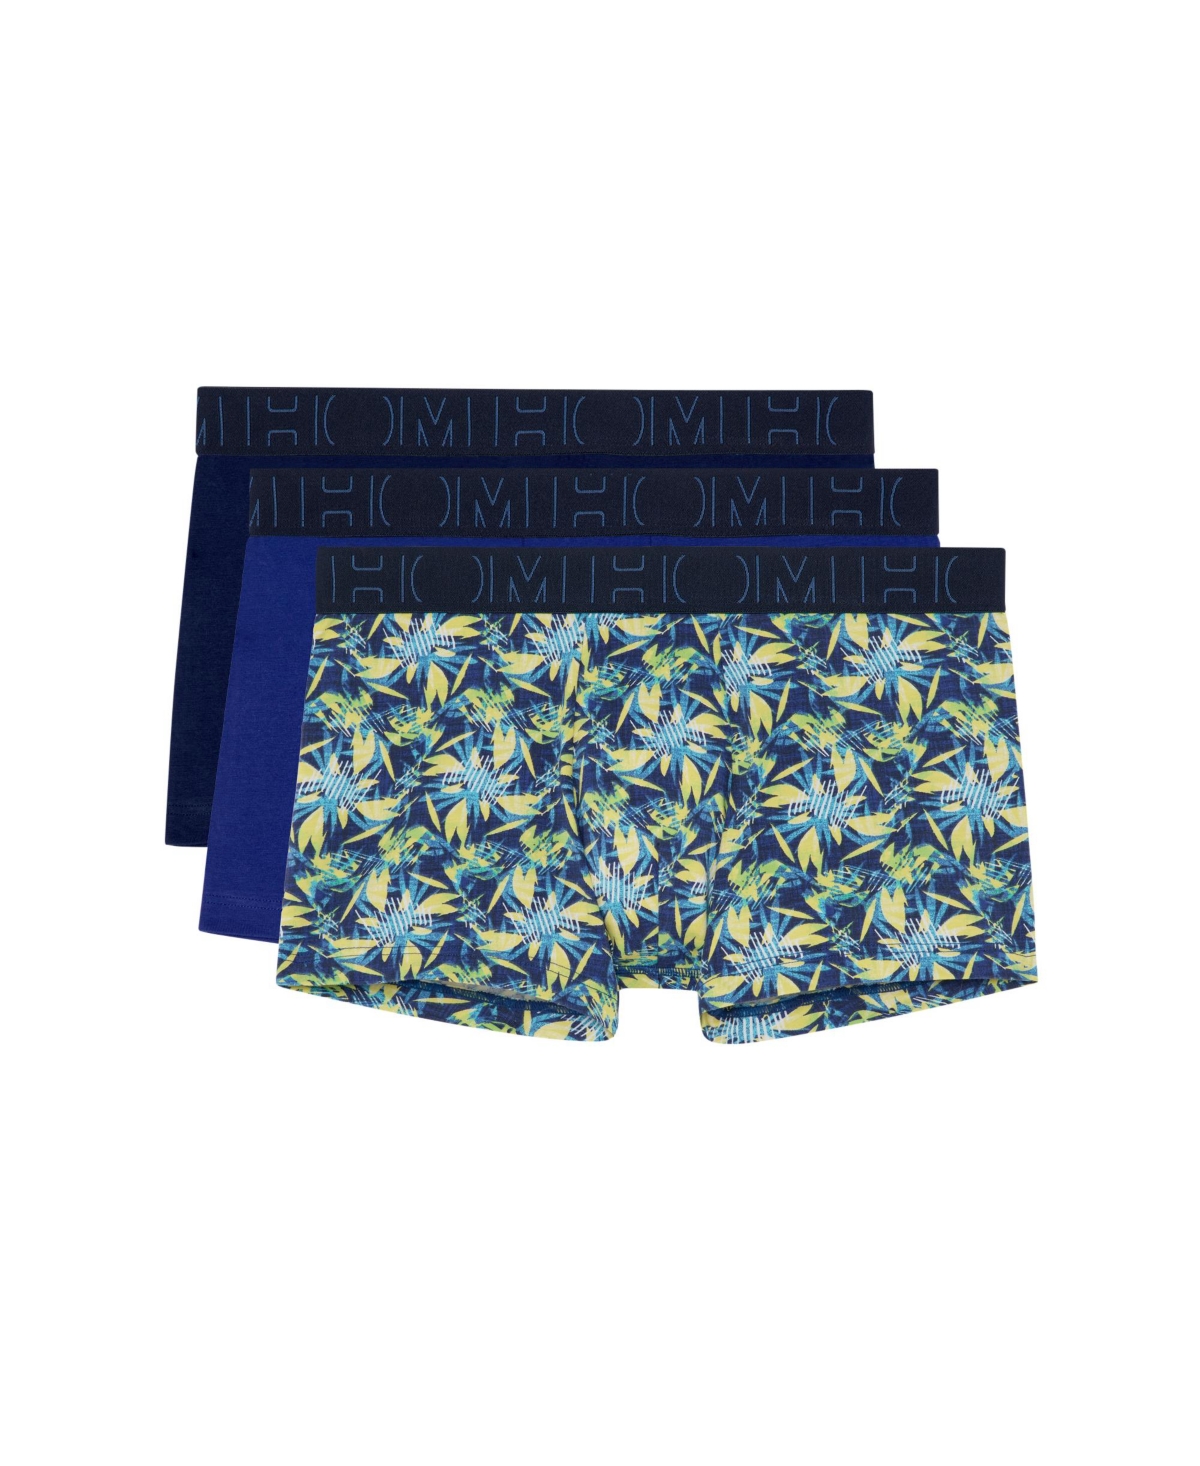 Men's Tropical Trunk 3 pack - Navy/electric blue/tropical print